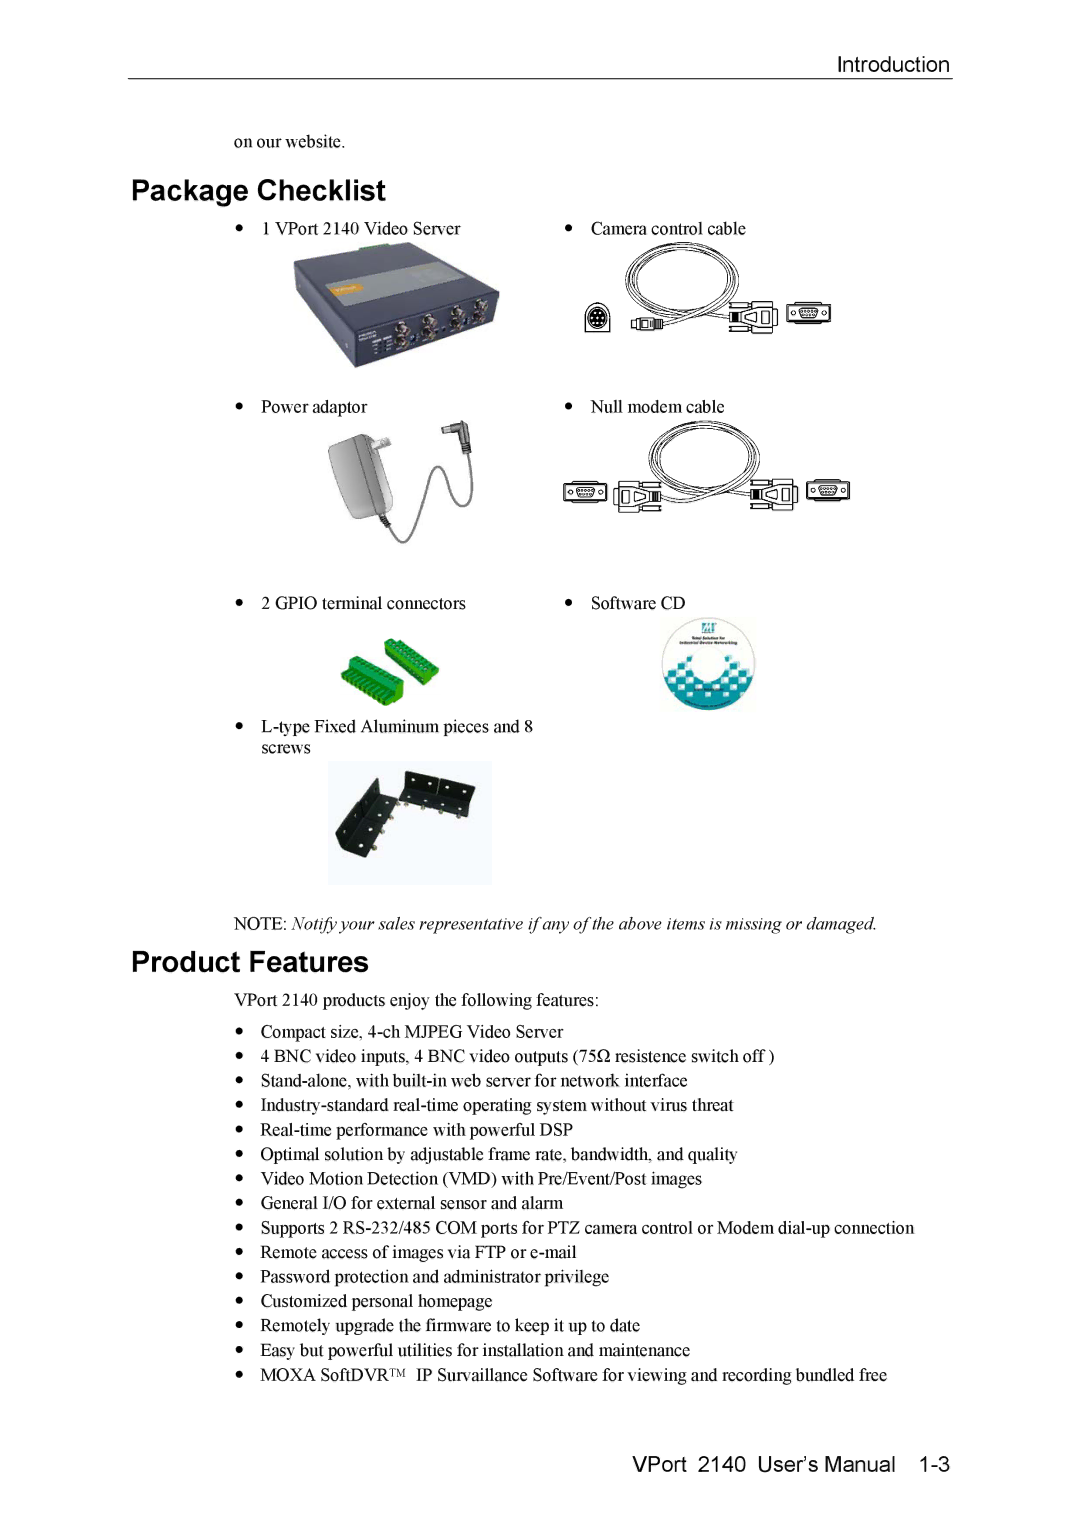 Moxa Technologies 2140 user manual Package Checklist, Product Features 